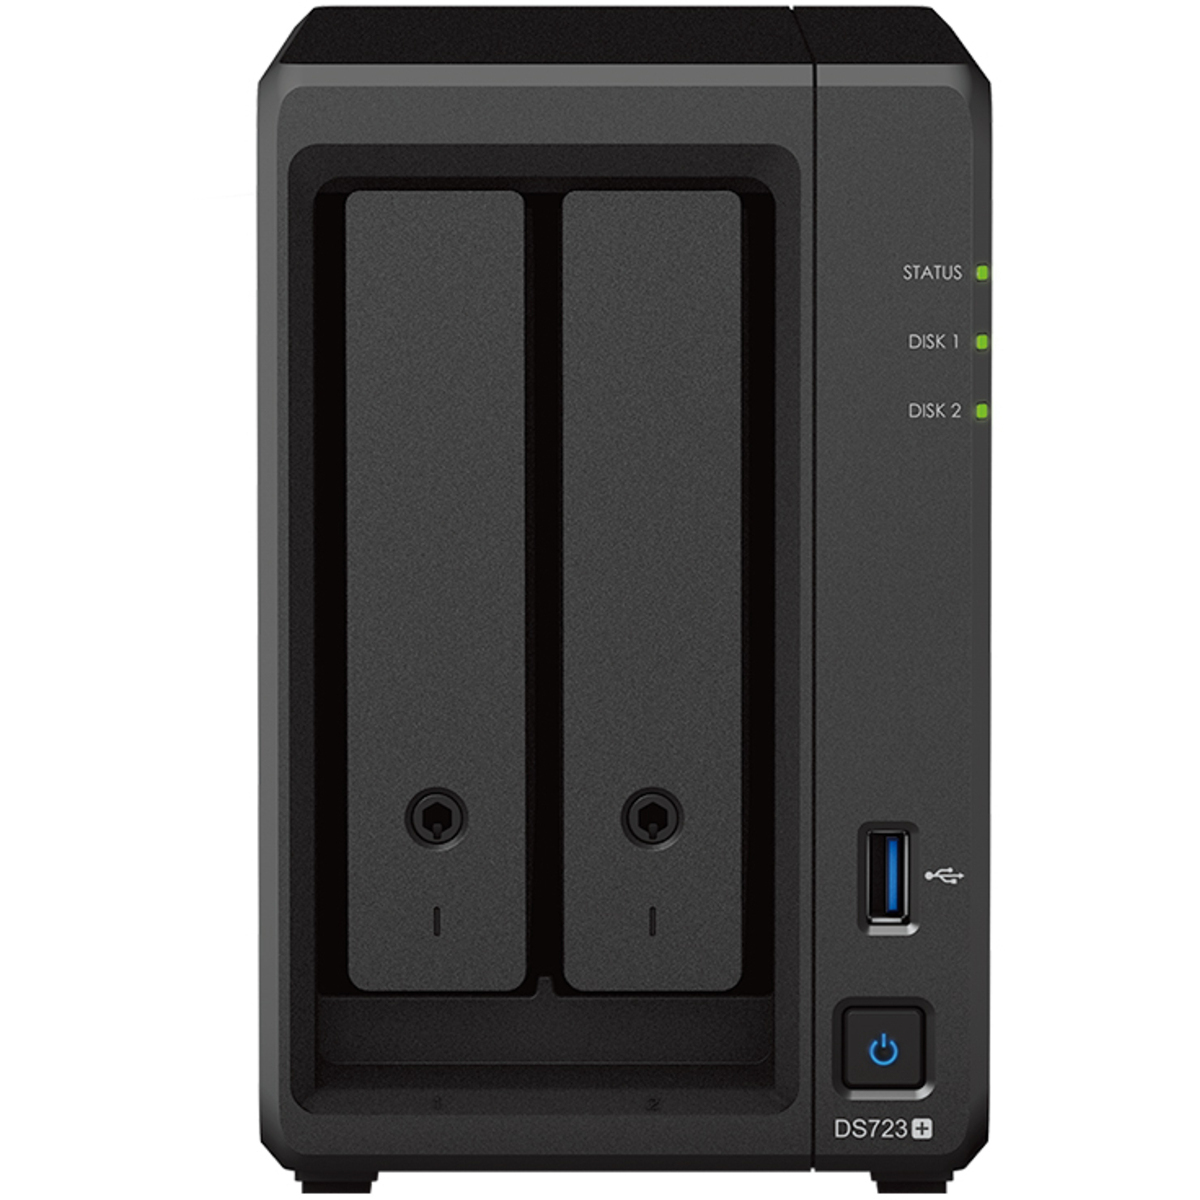 Synology DiskStation DS723+ 3.8tb 2-Bay Desktop Multimedia / Power User / Business NAS - Network Attached Storage Device 2x1.9tb Synology SAT5210 Series SAT5210-1920G 2.5 530/500MB/s SATA 6Gb/s SSD ENTERPRISE Class Drives Installed - Burn-In Tested DiskStation DS723+